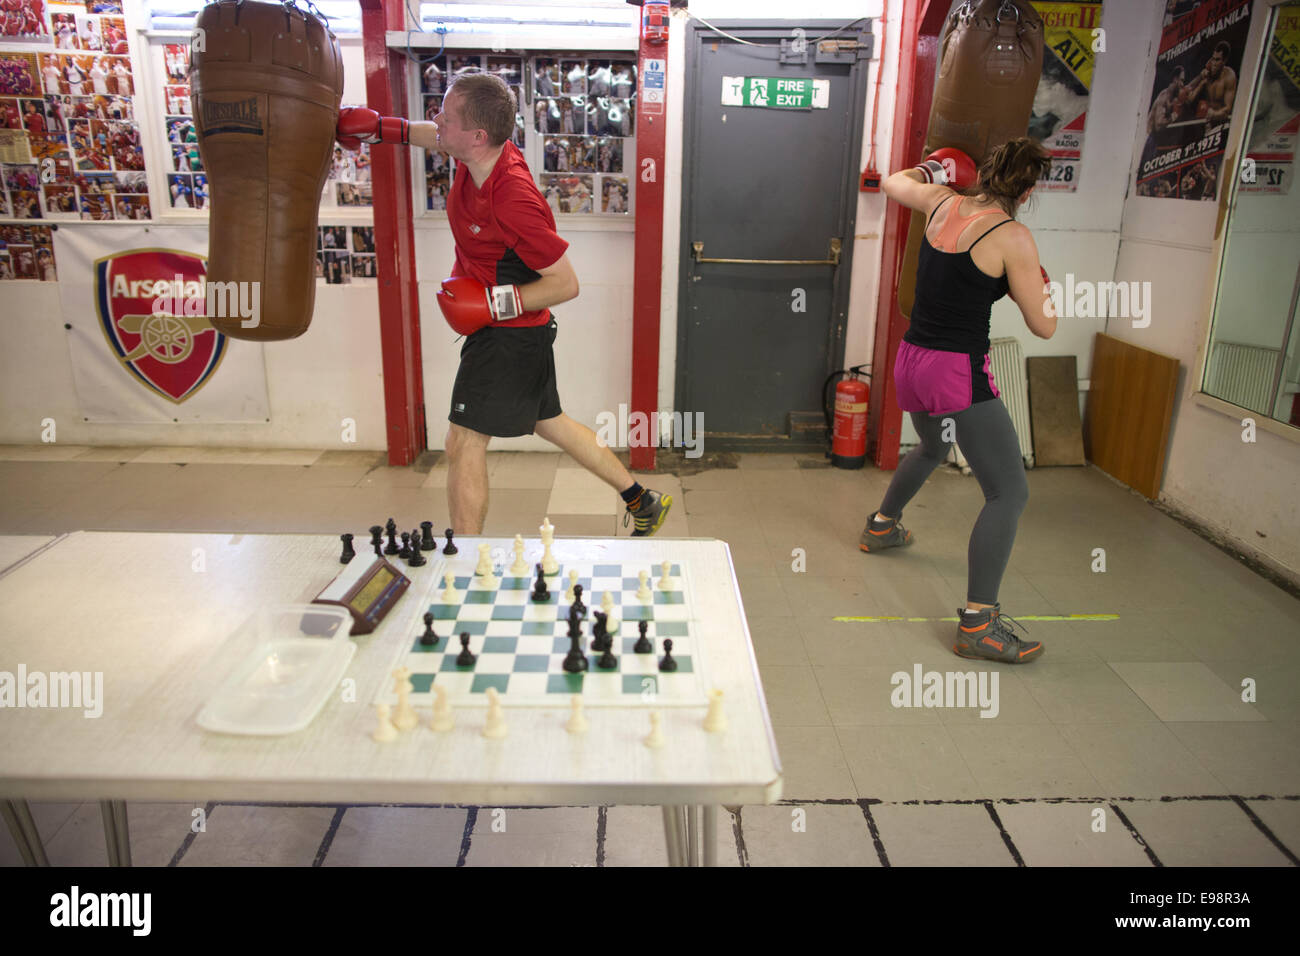 Chessboxing, amateur boxing and chess board game being played